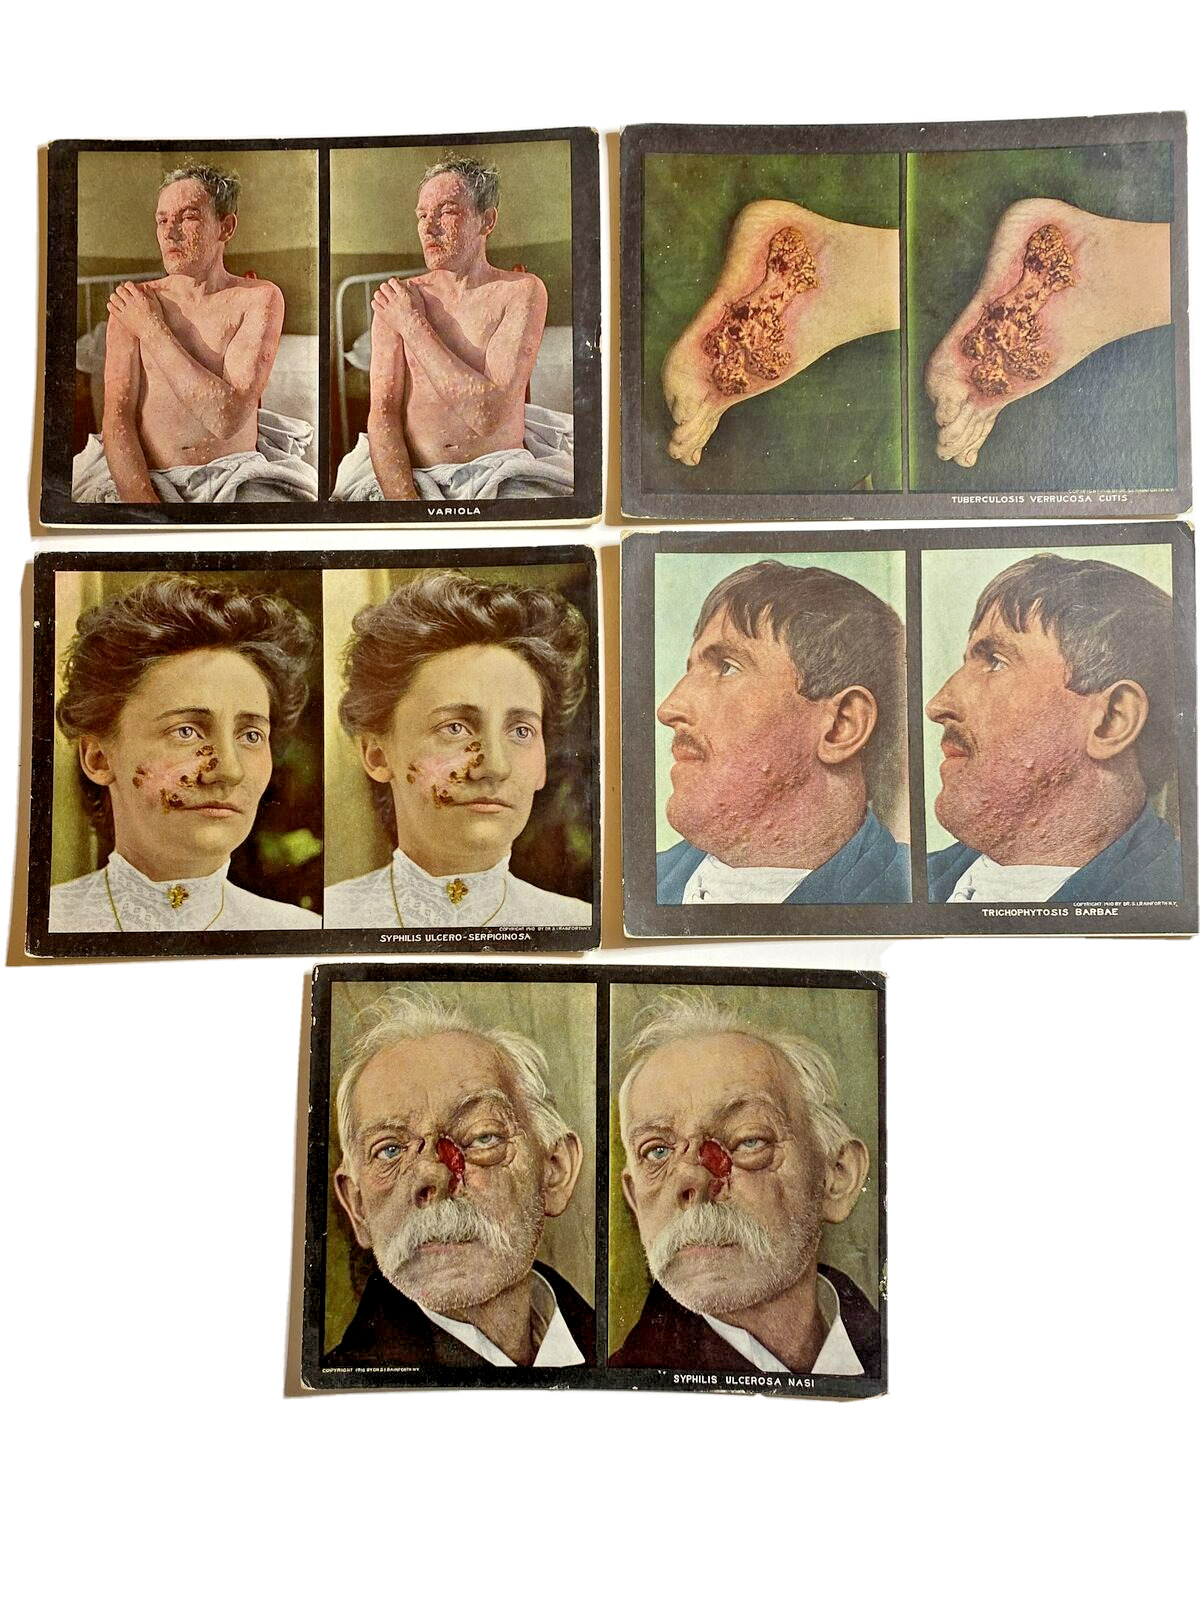 1910 Stereoscopic Skin Disease Clinic Cards Dr Rainforth NY-Macabre Set 115/128